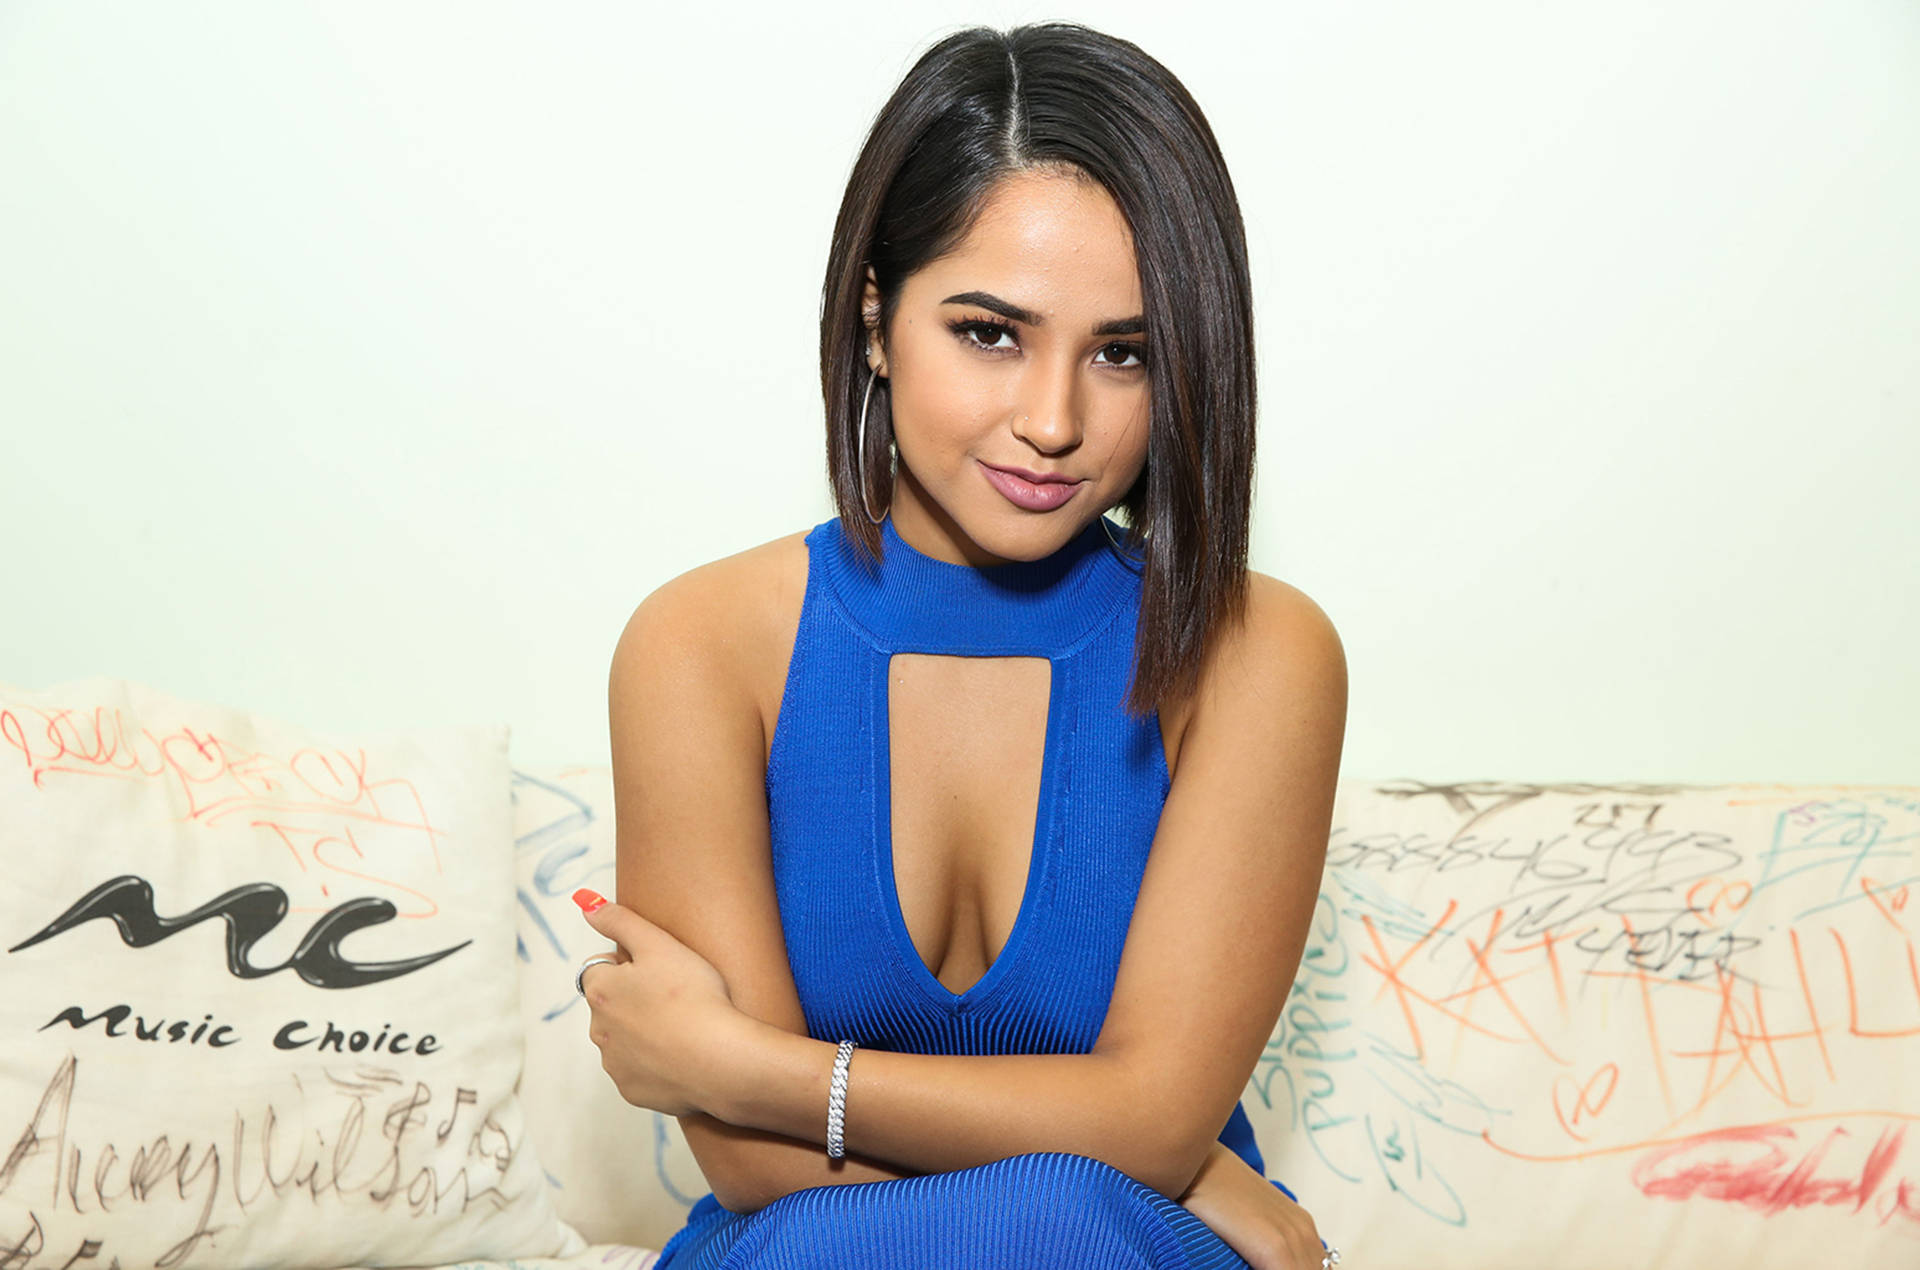 Free Becky G Wallpaper Downloads, [100+] Becky G Wallpapers for FREE |  